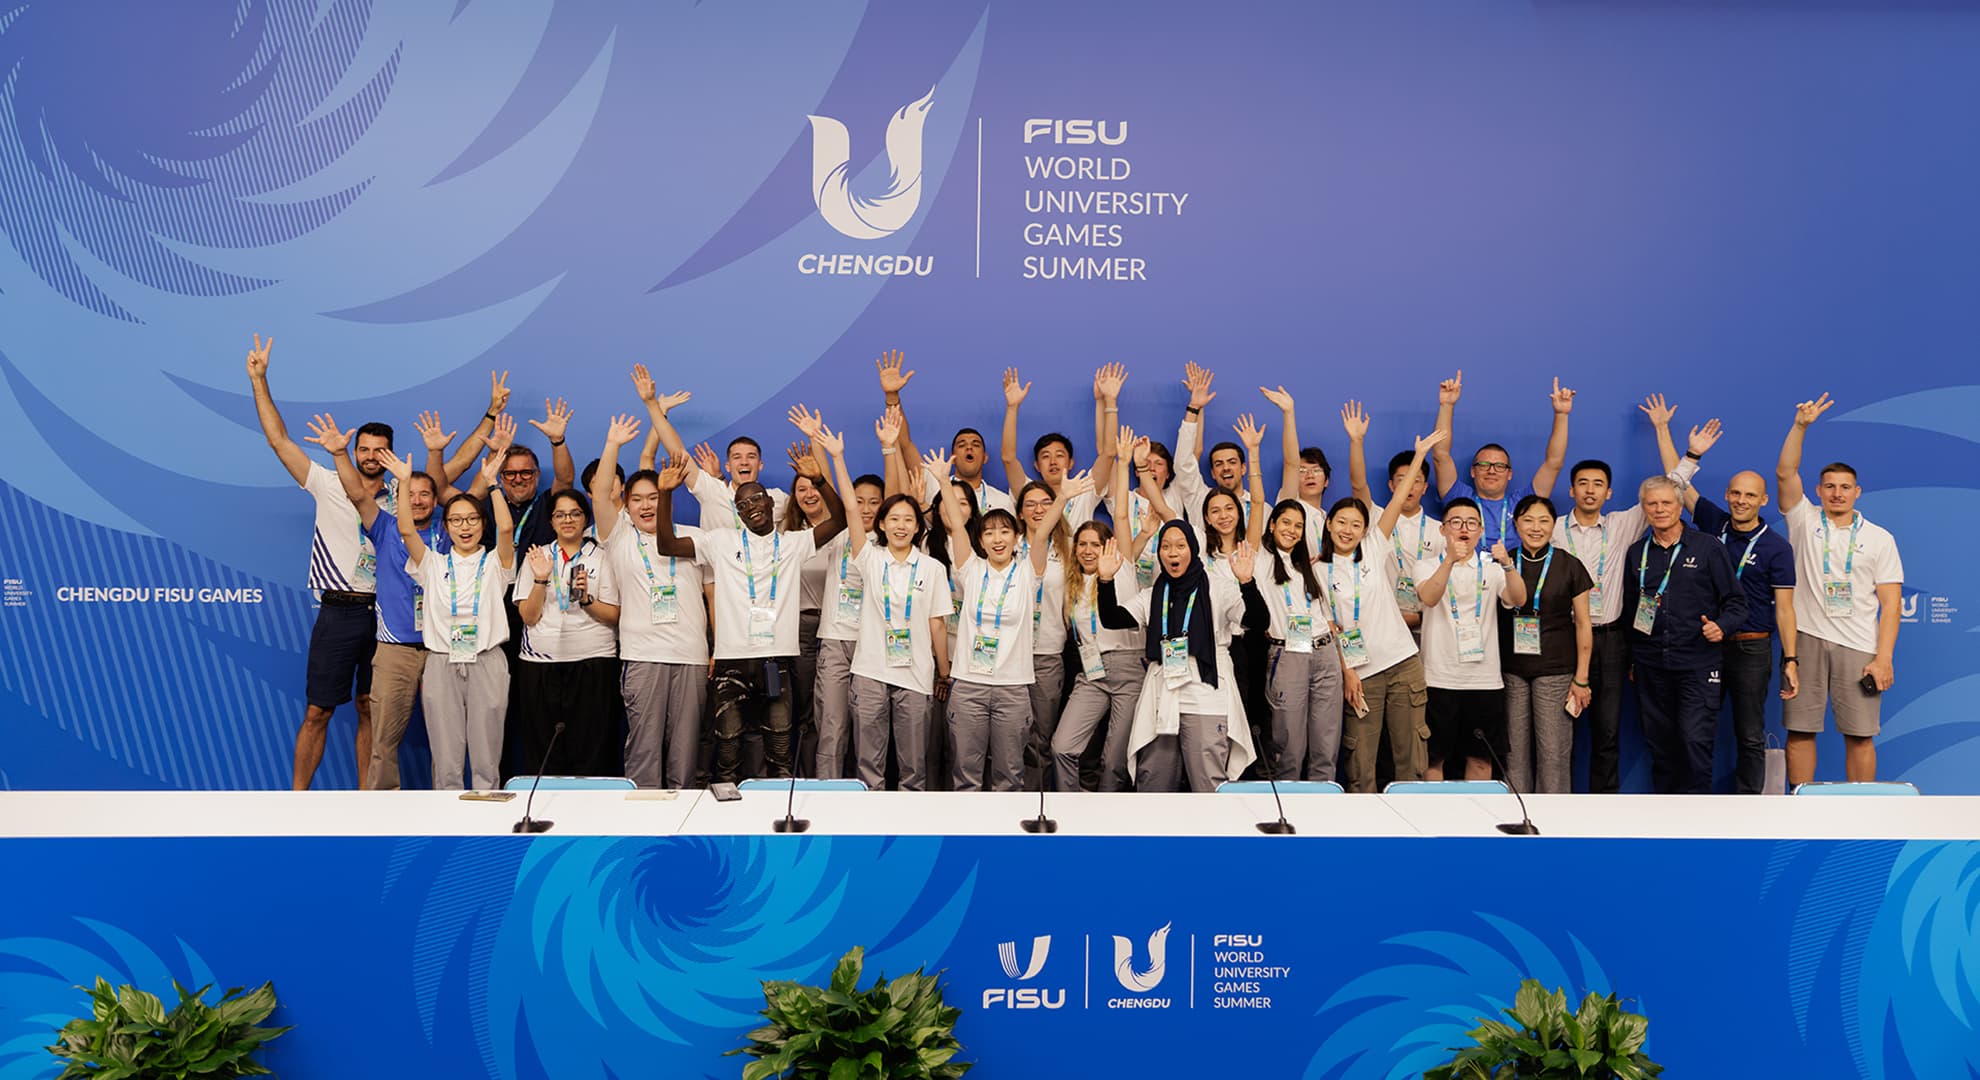 Competitors standing in front of FISU World Games banner